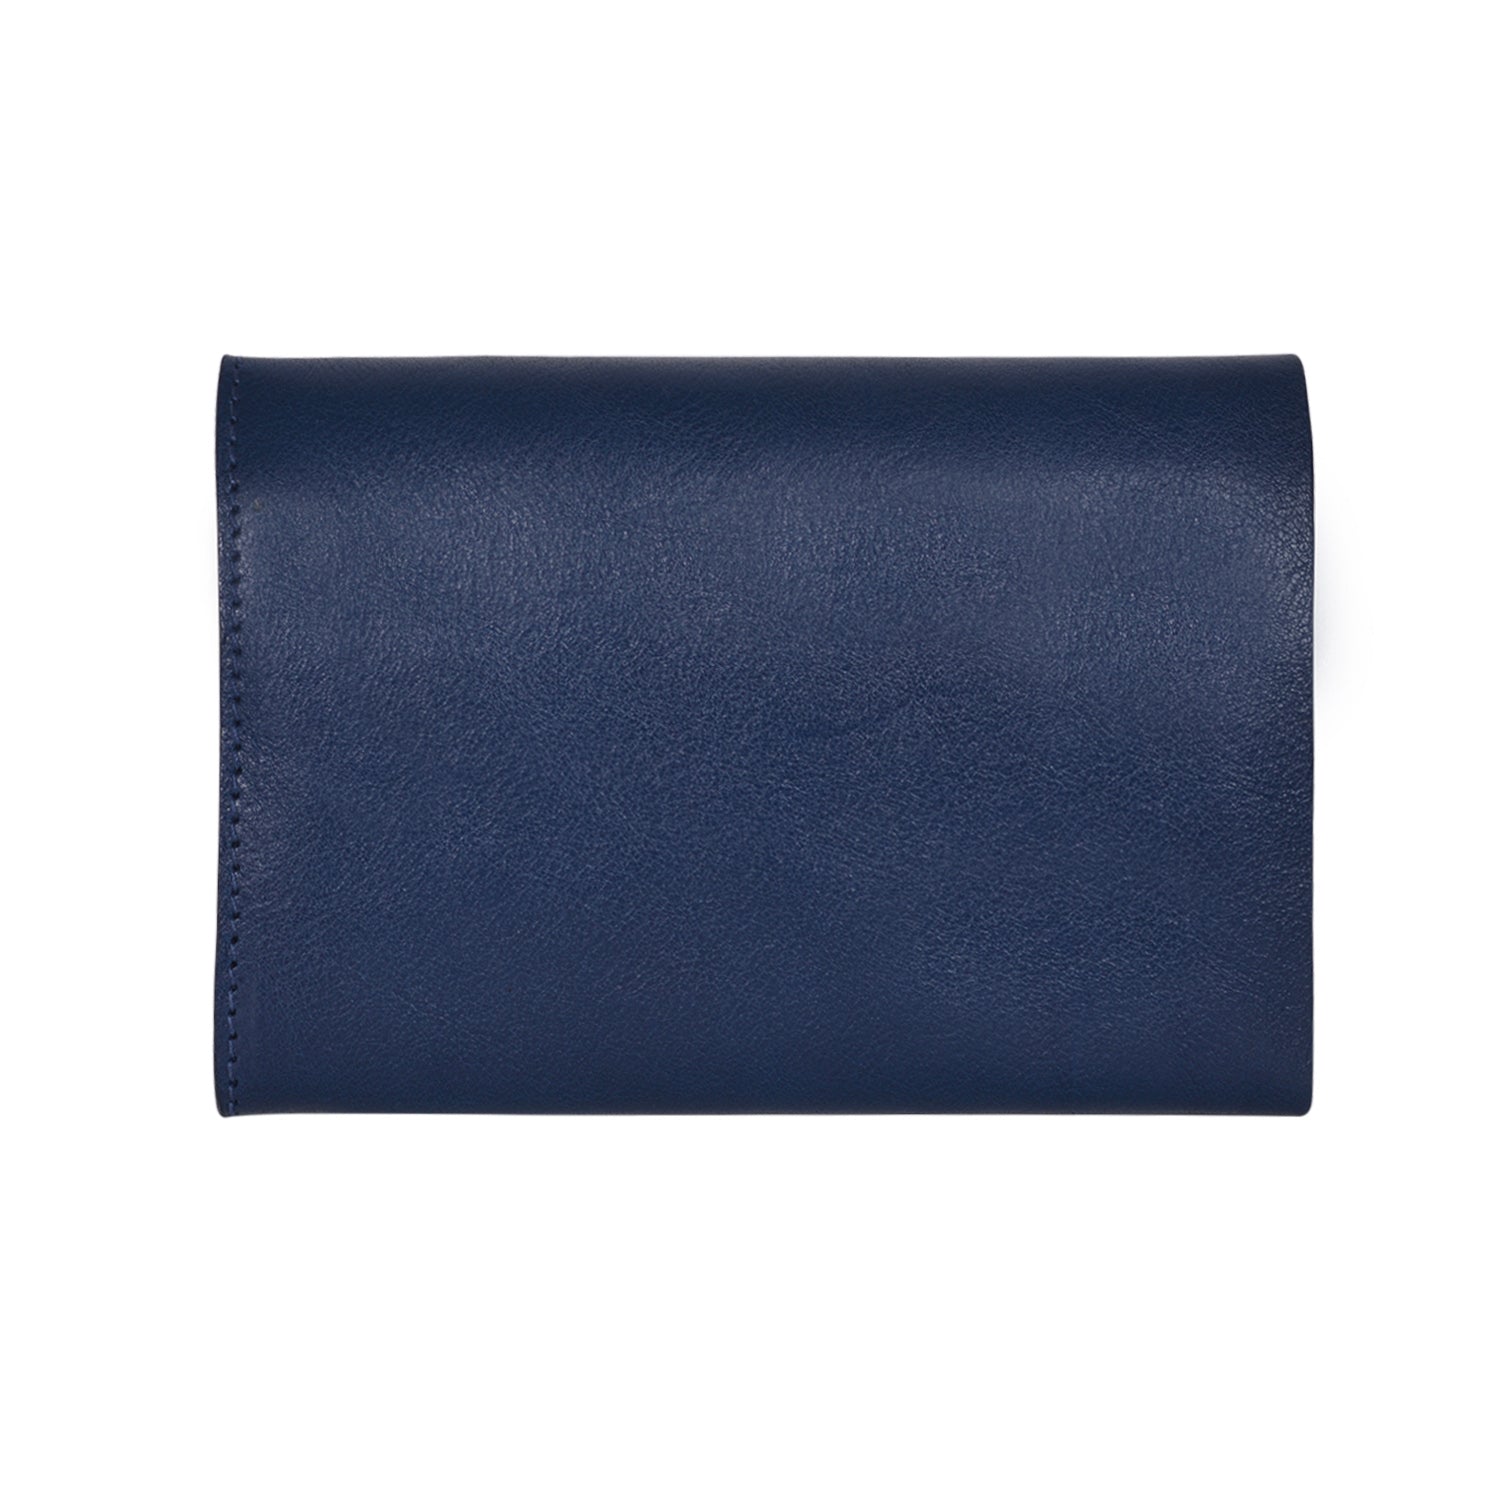 IL BISONTE UNISEX COMPACT FOLDING WALLET IN BLUE COWHIDE LEATHER